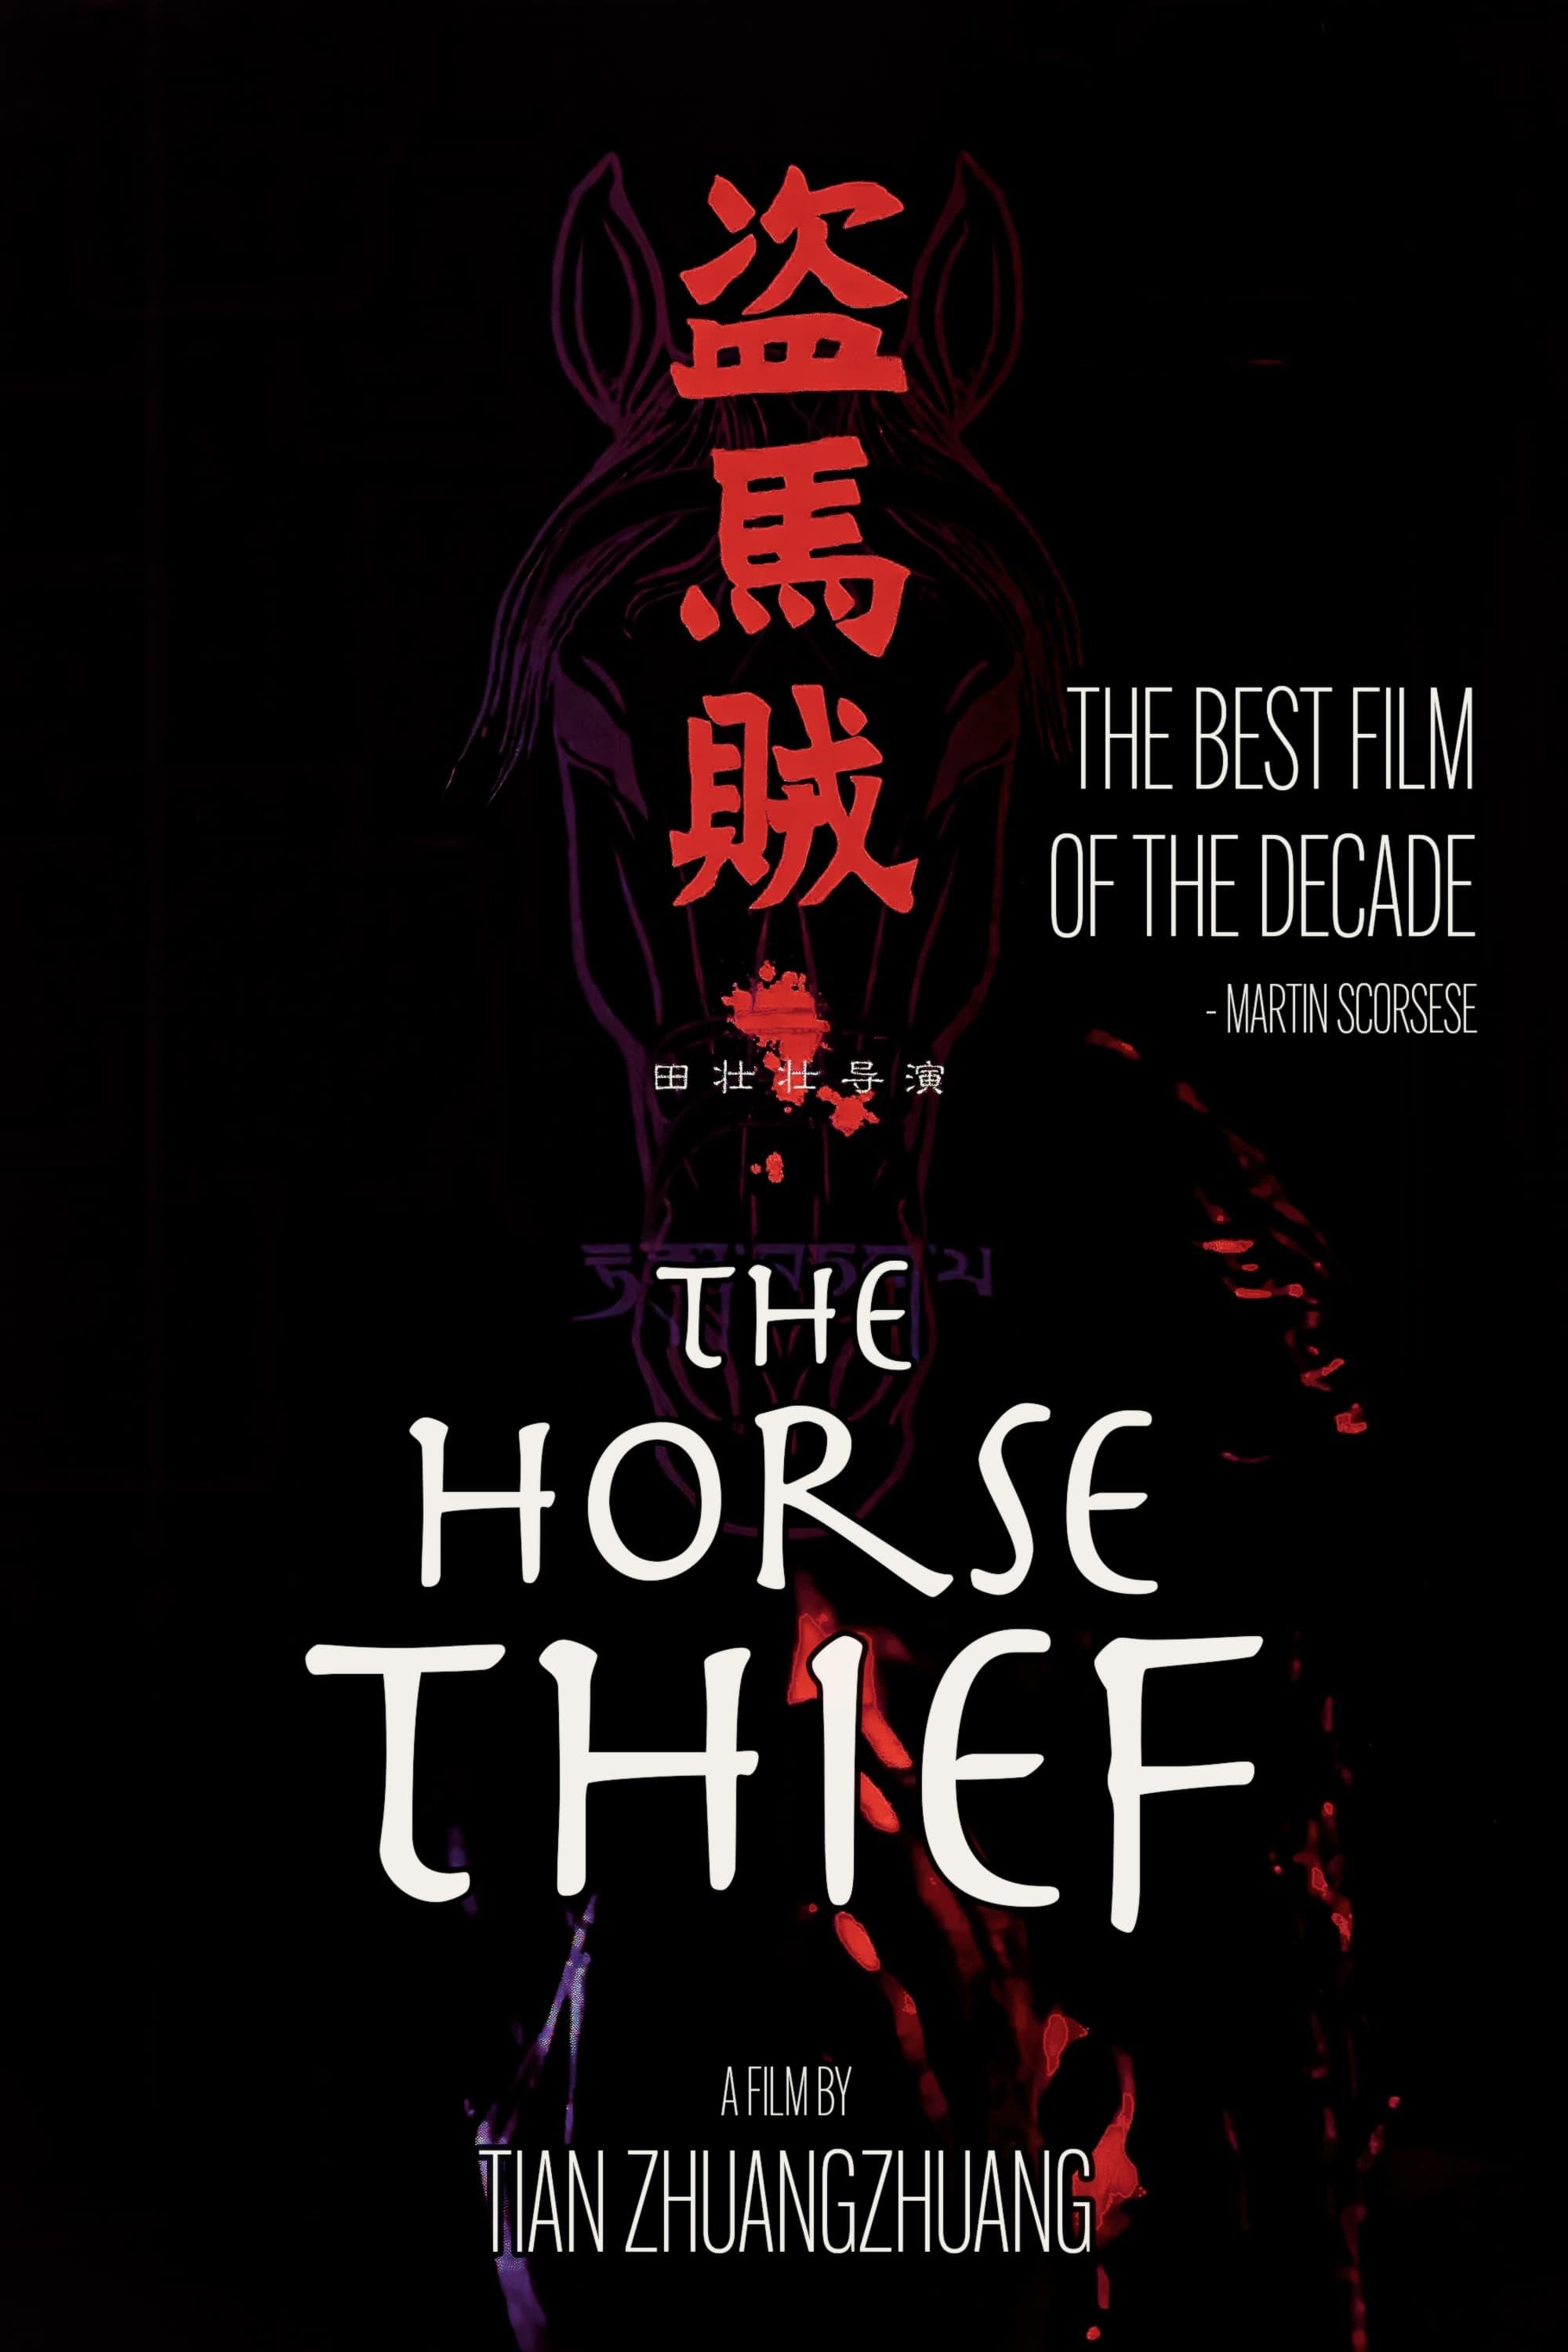 The Horse Thief poster